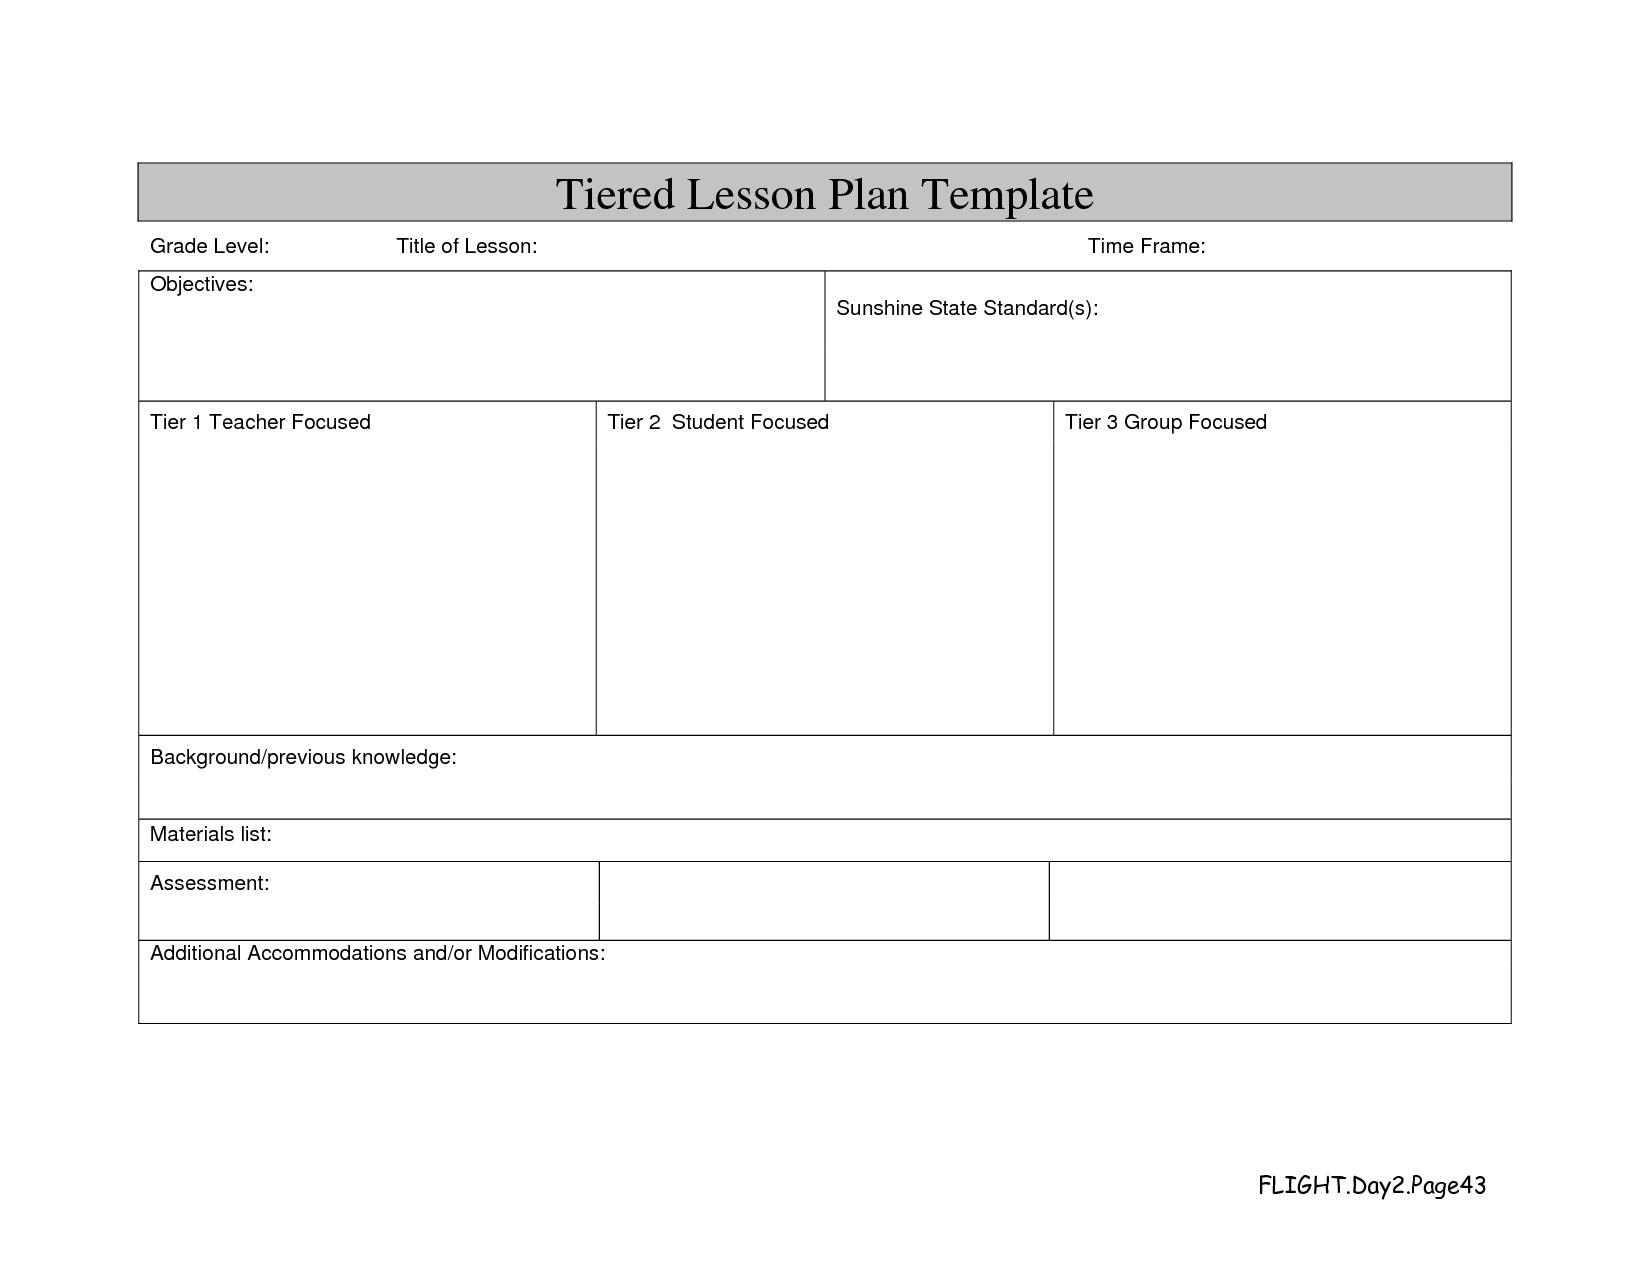 differentiated lesson plan template